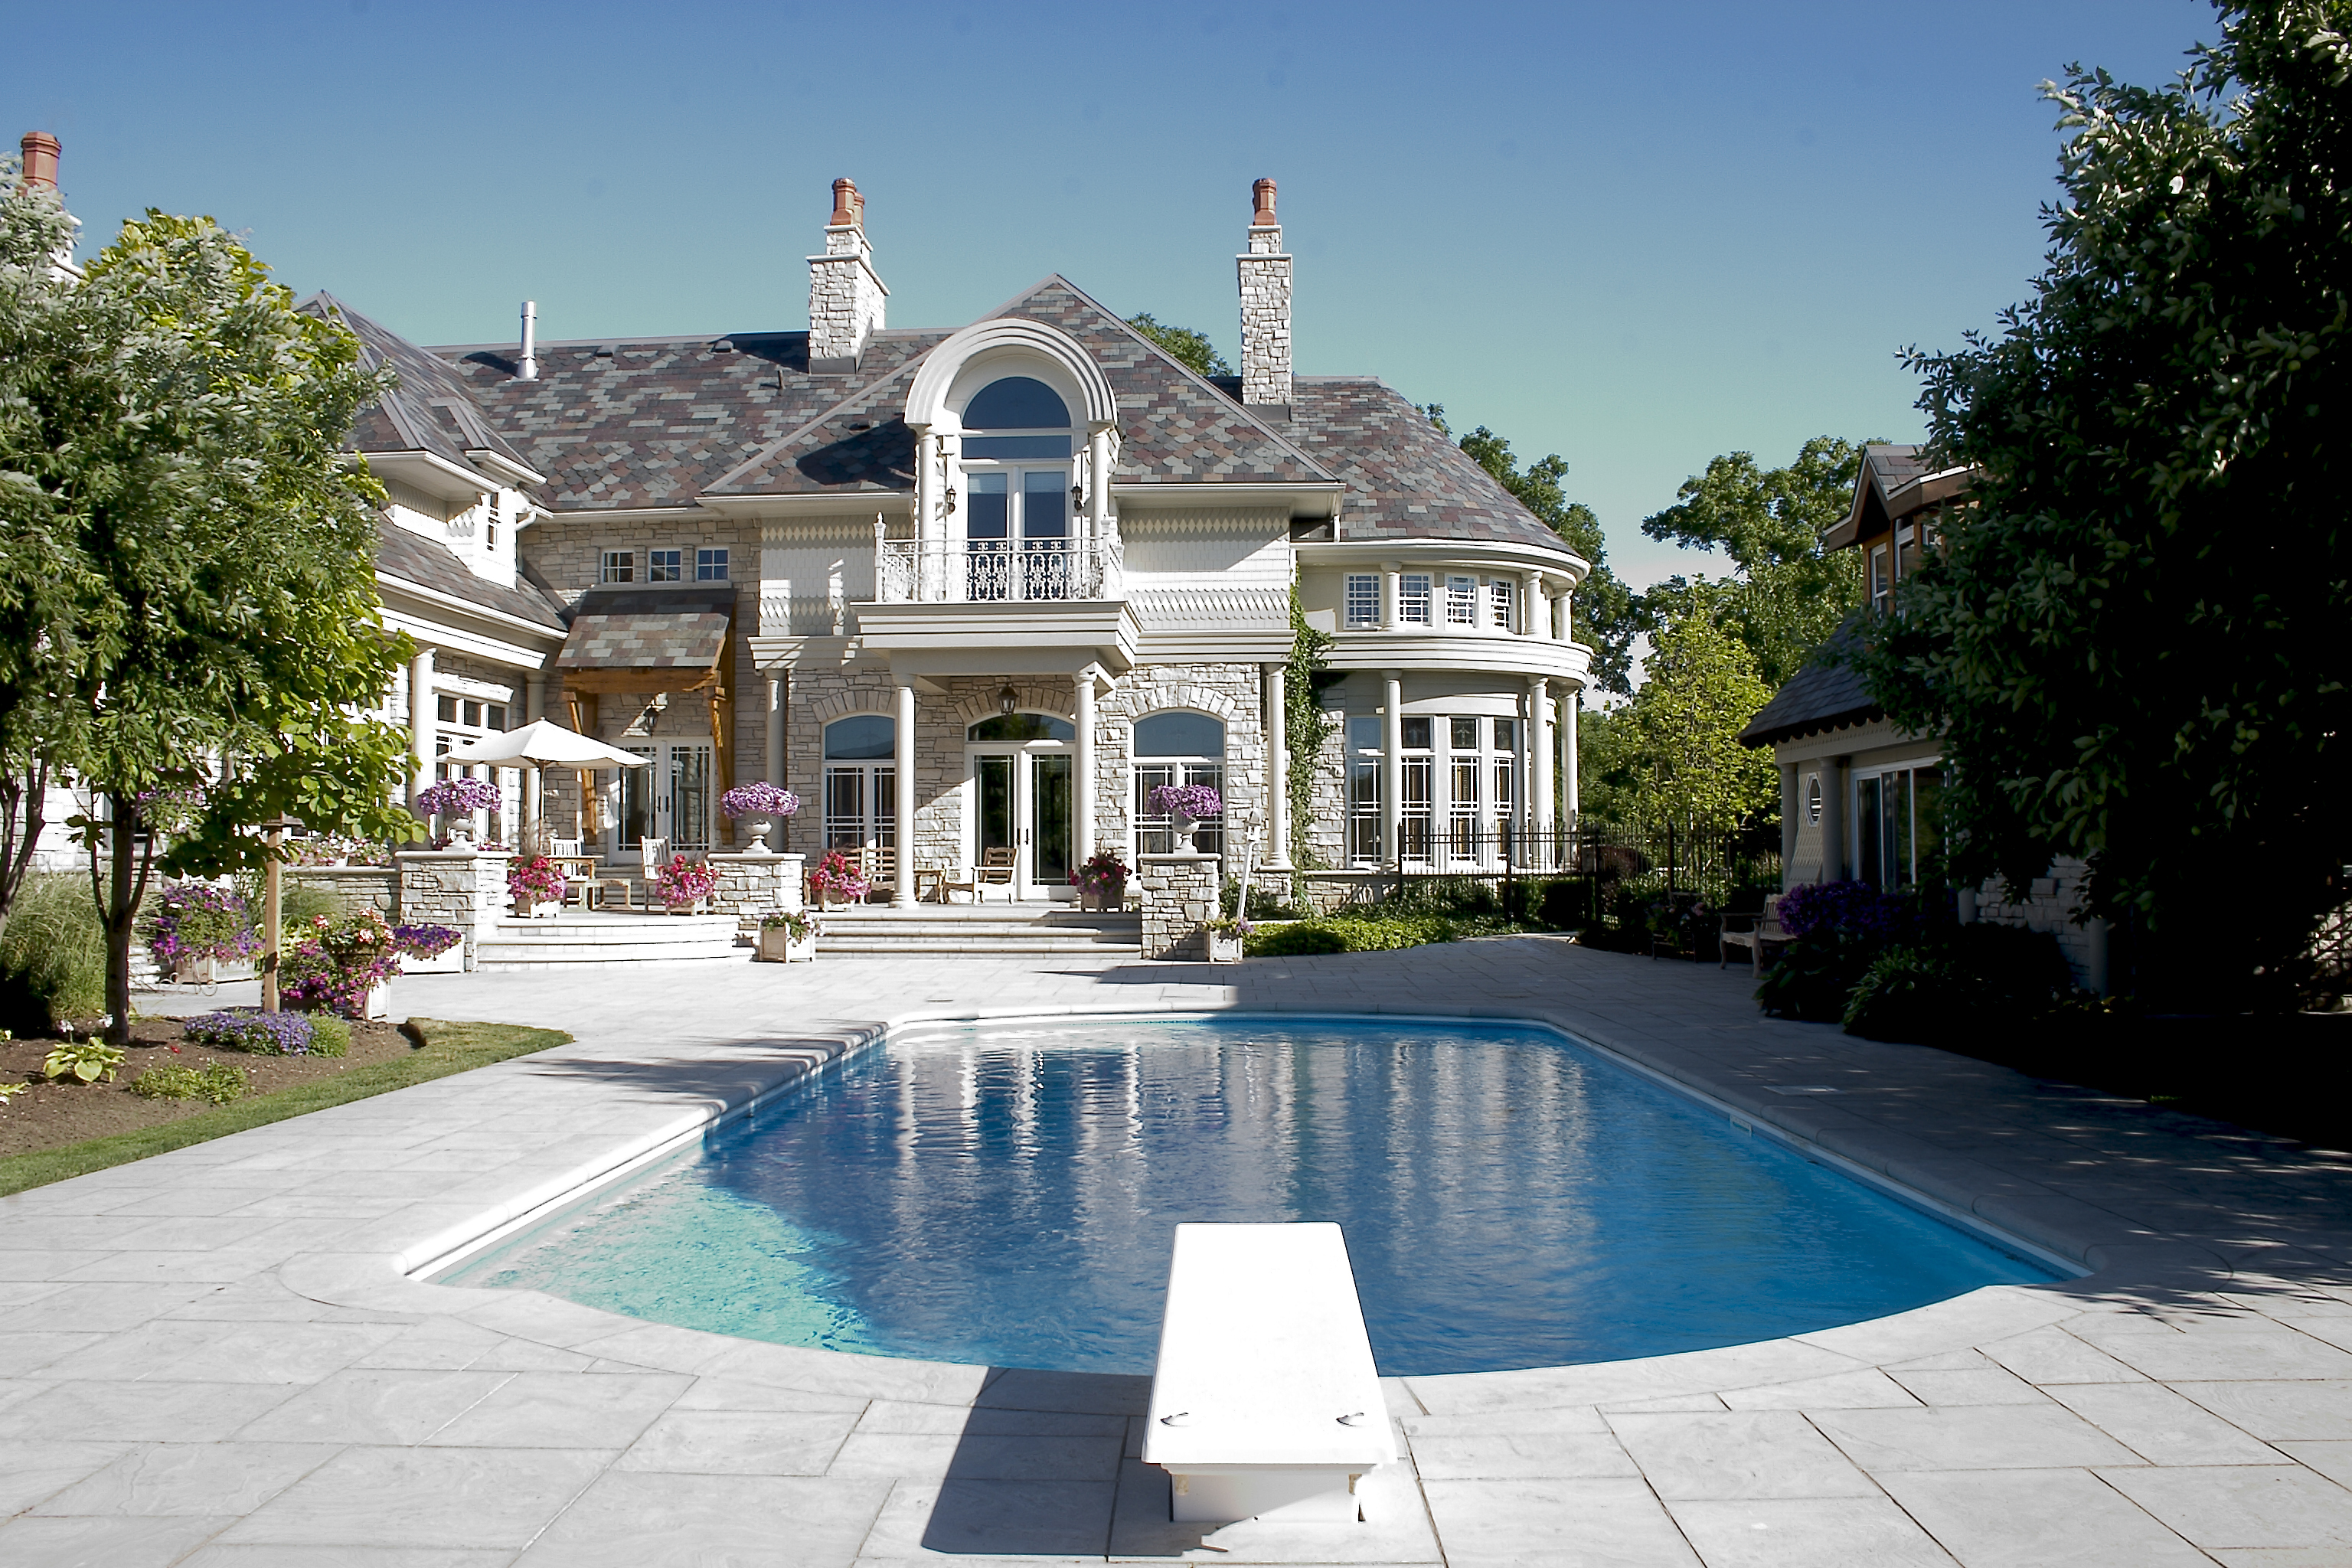 Luxury Real Estate - Home with a pool